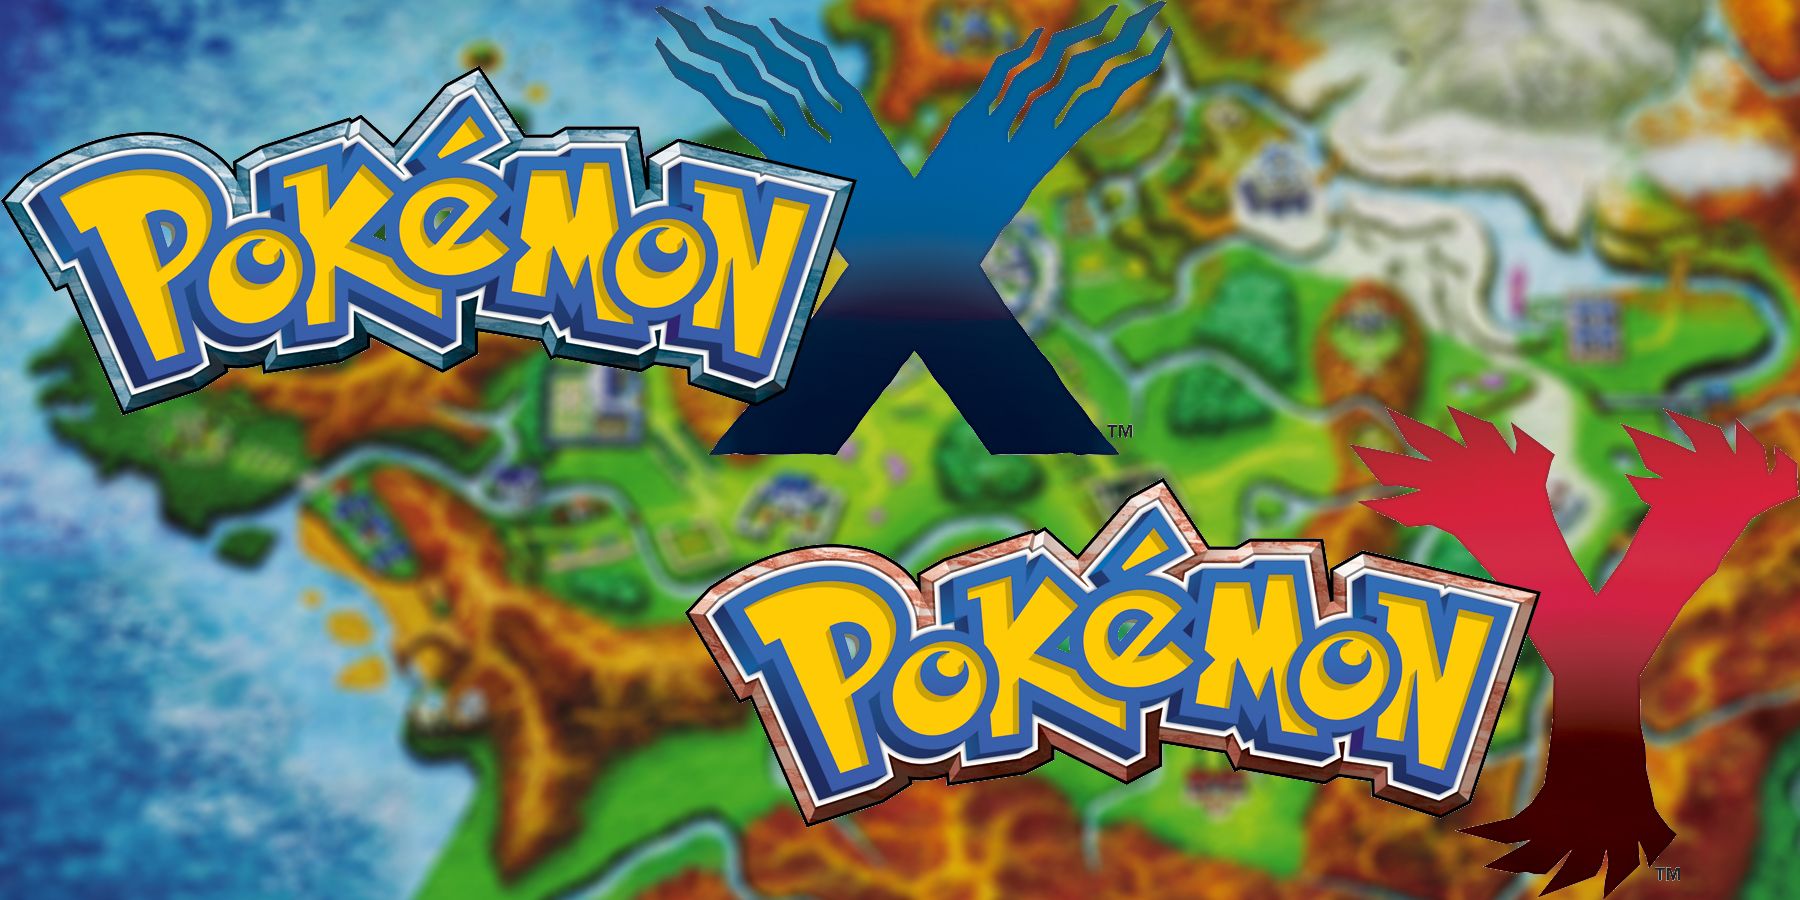 The Pokemon X and Y logos with a map of the Kalos region in the background.